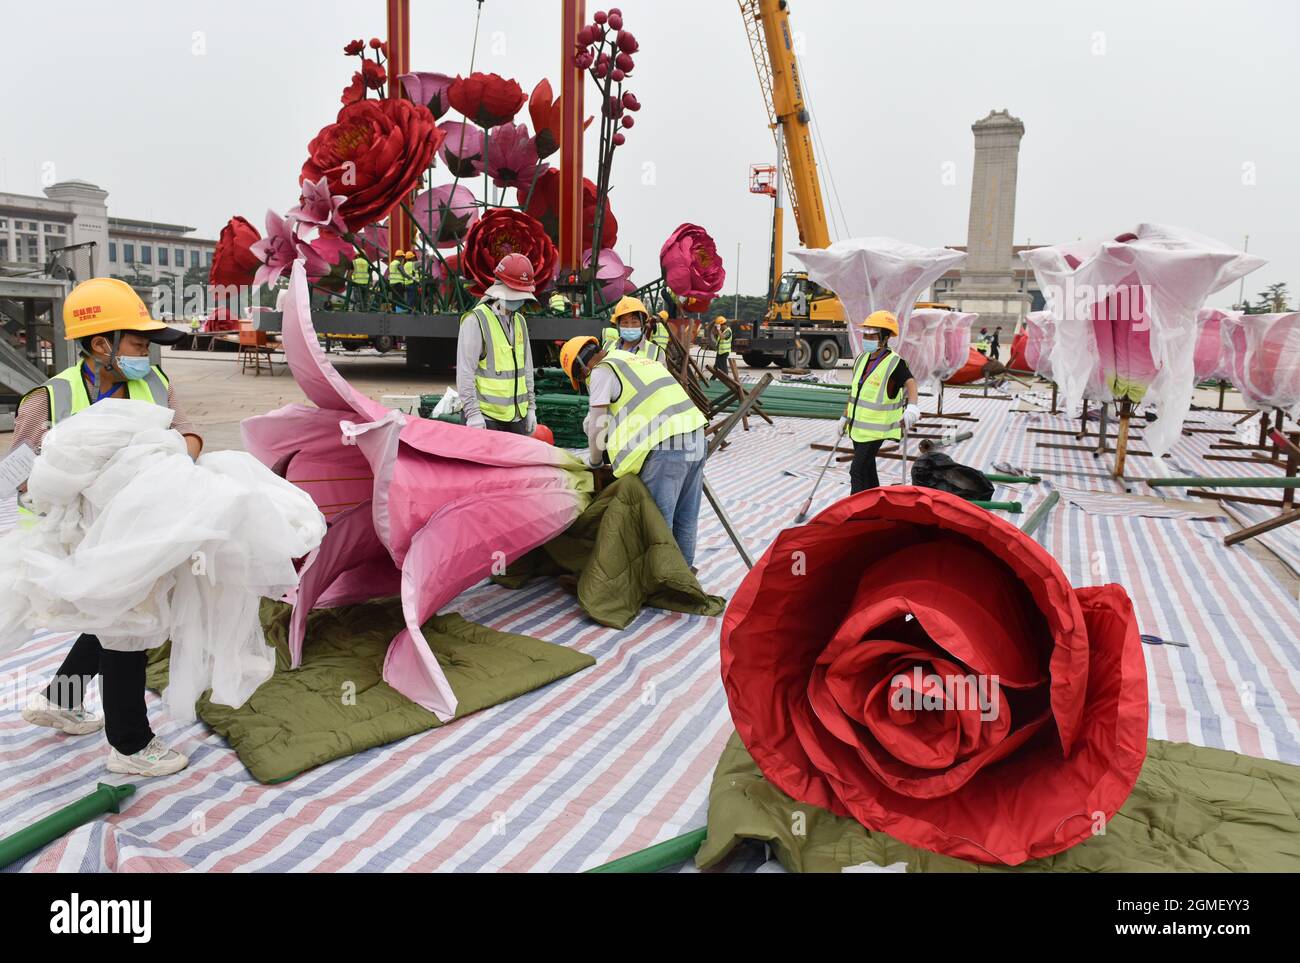 In Beijing's Tiananmen Square, construction workers are seen arranging a flower bed. On October 1 this year, the national day of the people's Republic of China, a flower bed with the theme of 'bless the motherland' will be placed in the center of Tiananmen Square. The top of the flower bed is 18 meters high, with a festive flower basket as the main scene. (Photo by Sheldon Cooper / SOPA Images/Sipa USA) Stock Photo